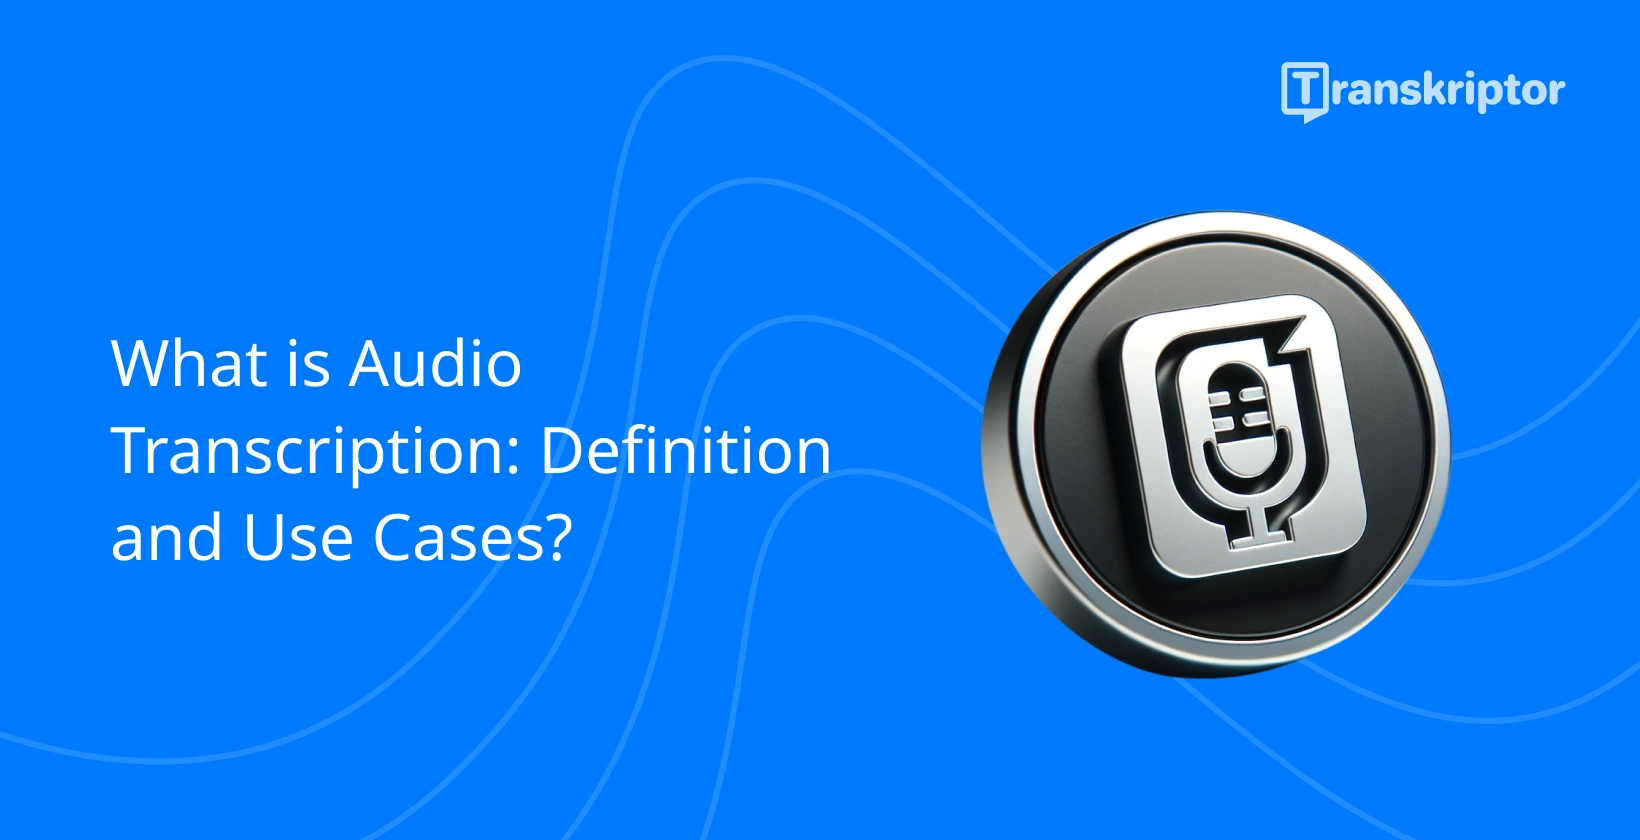 Audio transcription icon with microphone and document on a blue background for defining transcription use cases.